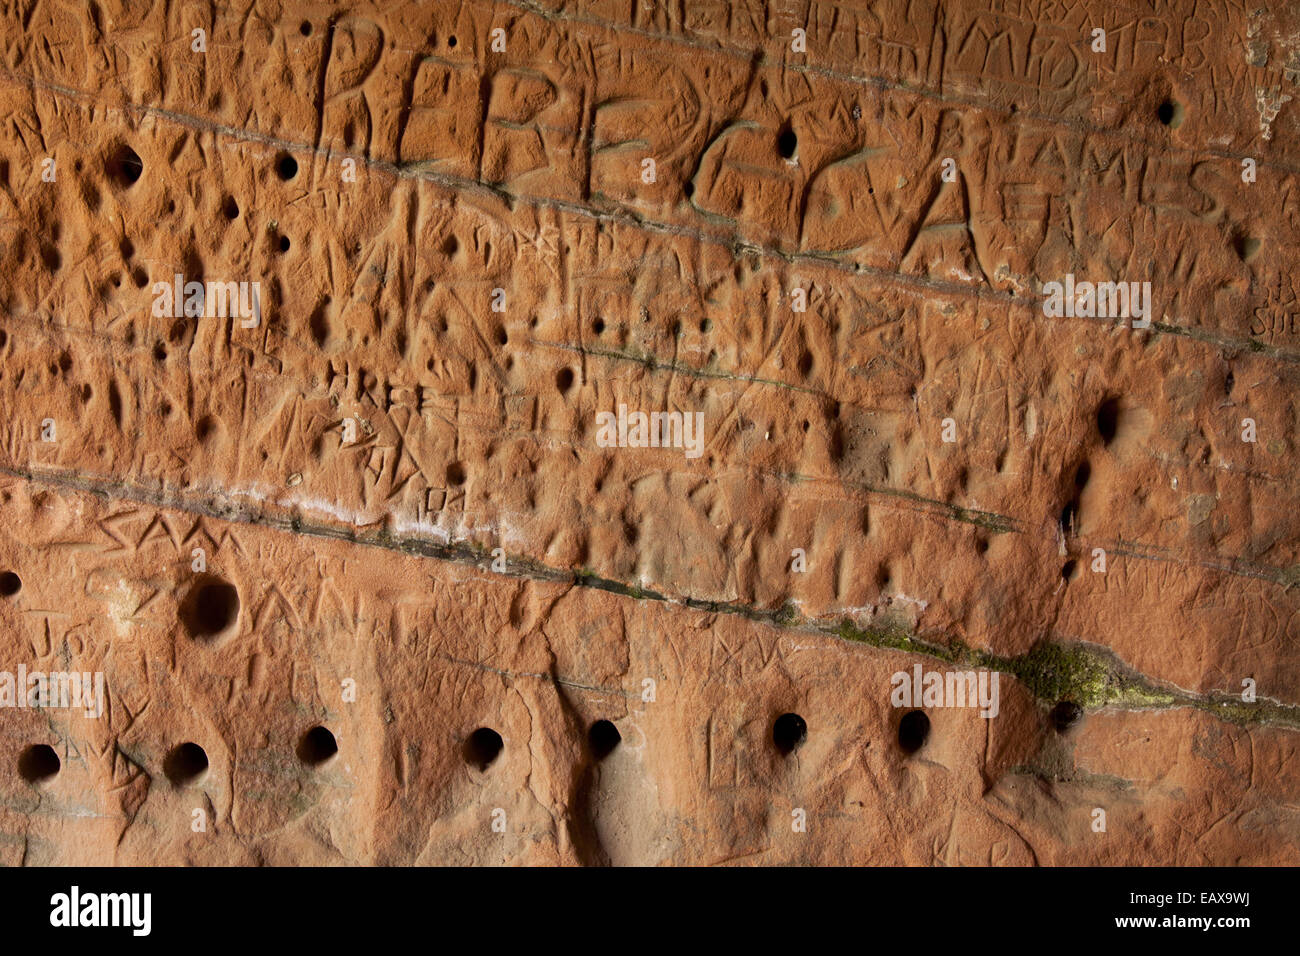 Carved sandstone cave with names and graffiti, showing the clear strata within the rock, Kinver Edge, Shropshire, UK Stock Photo